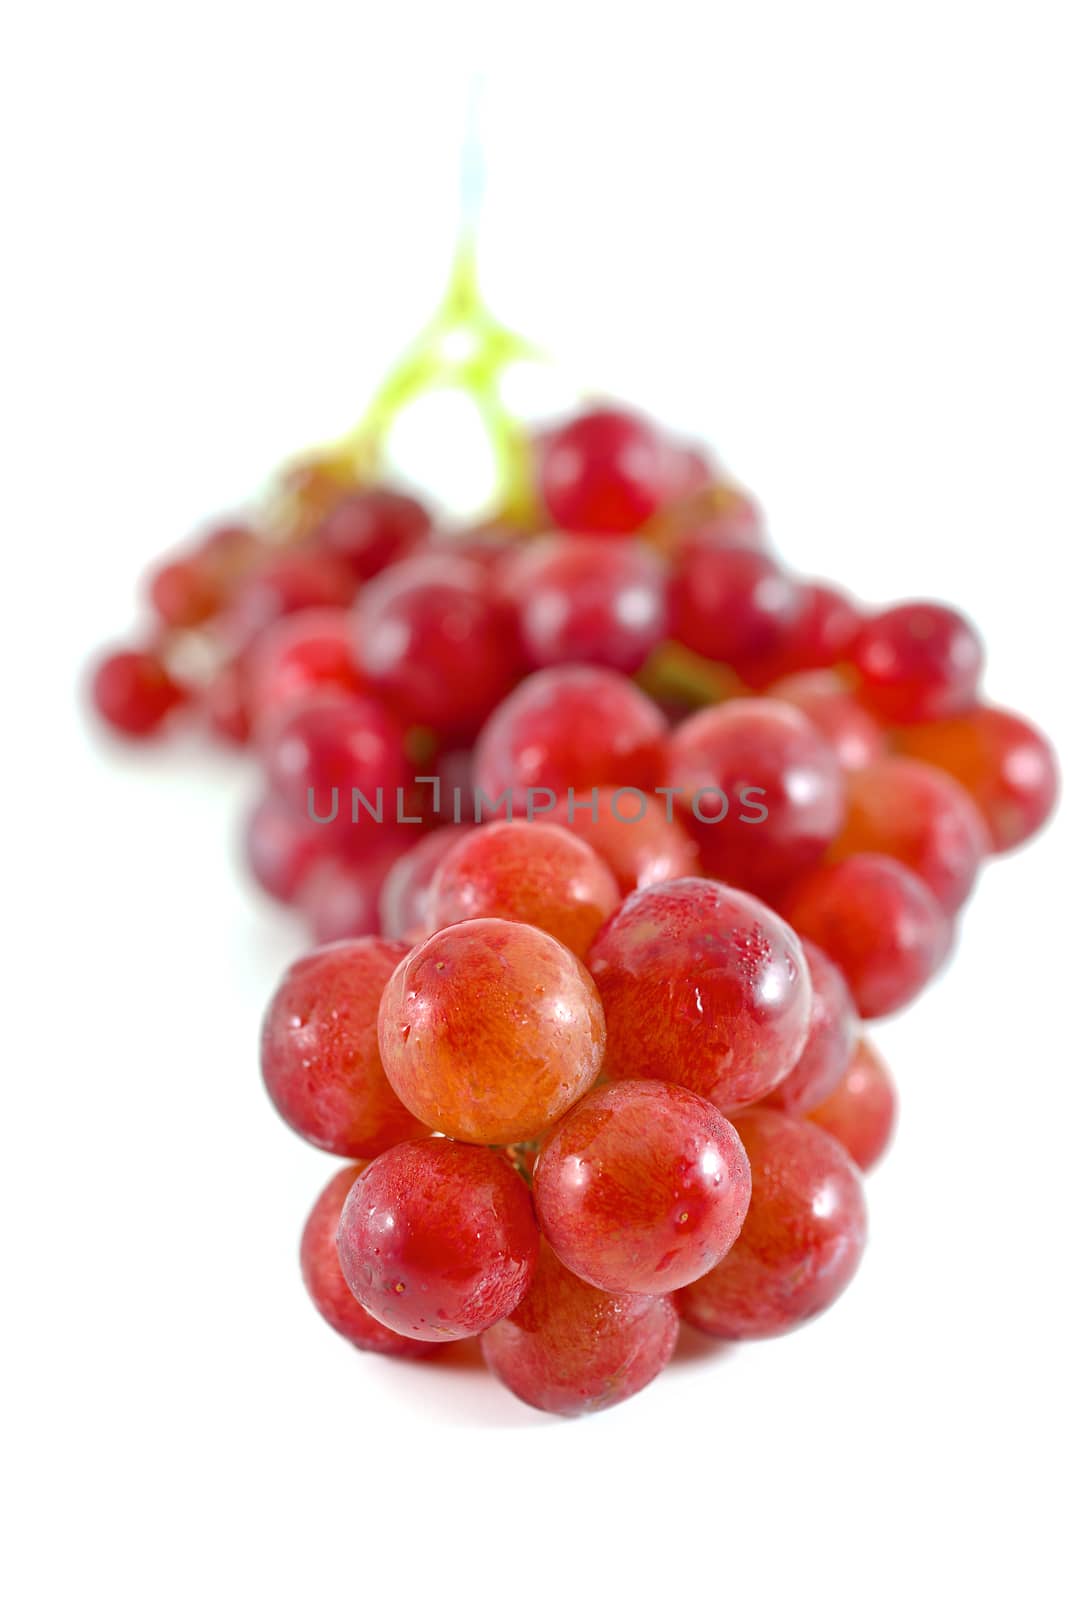 red grapes by antpkr